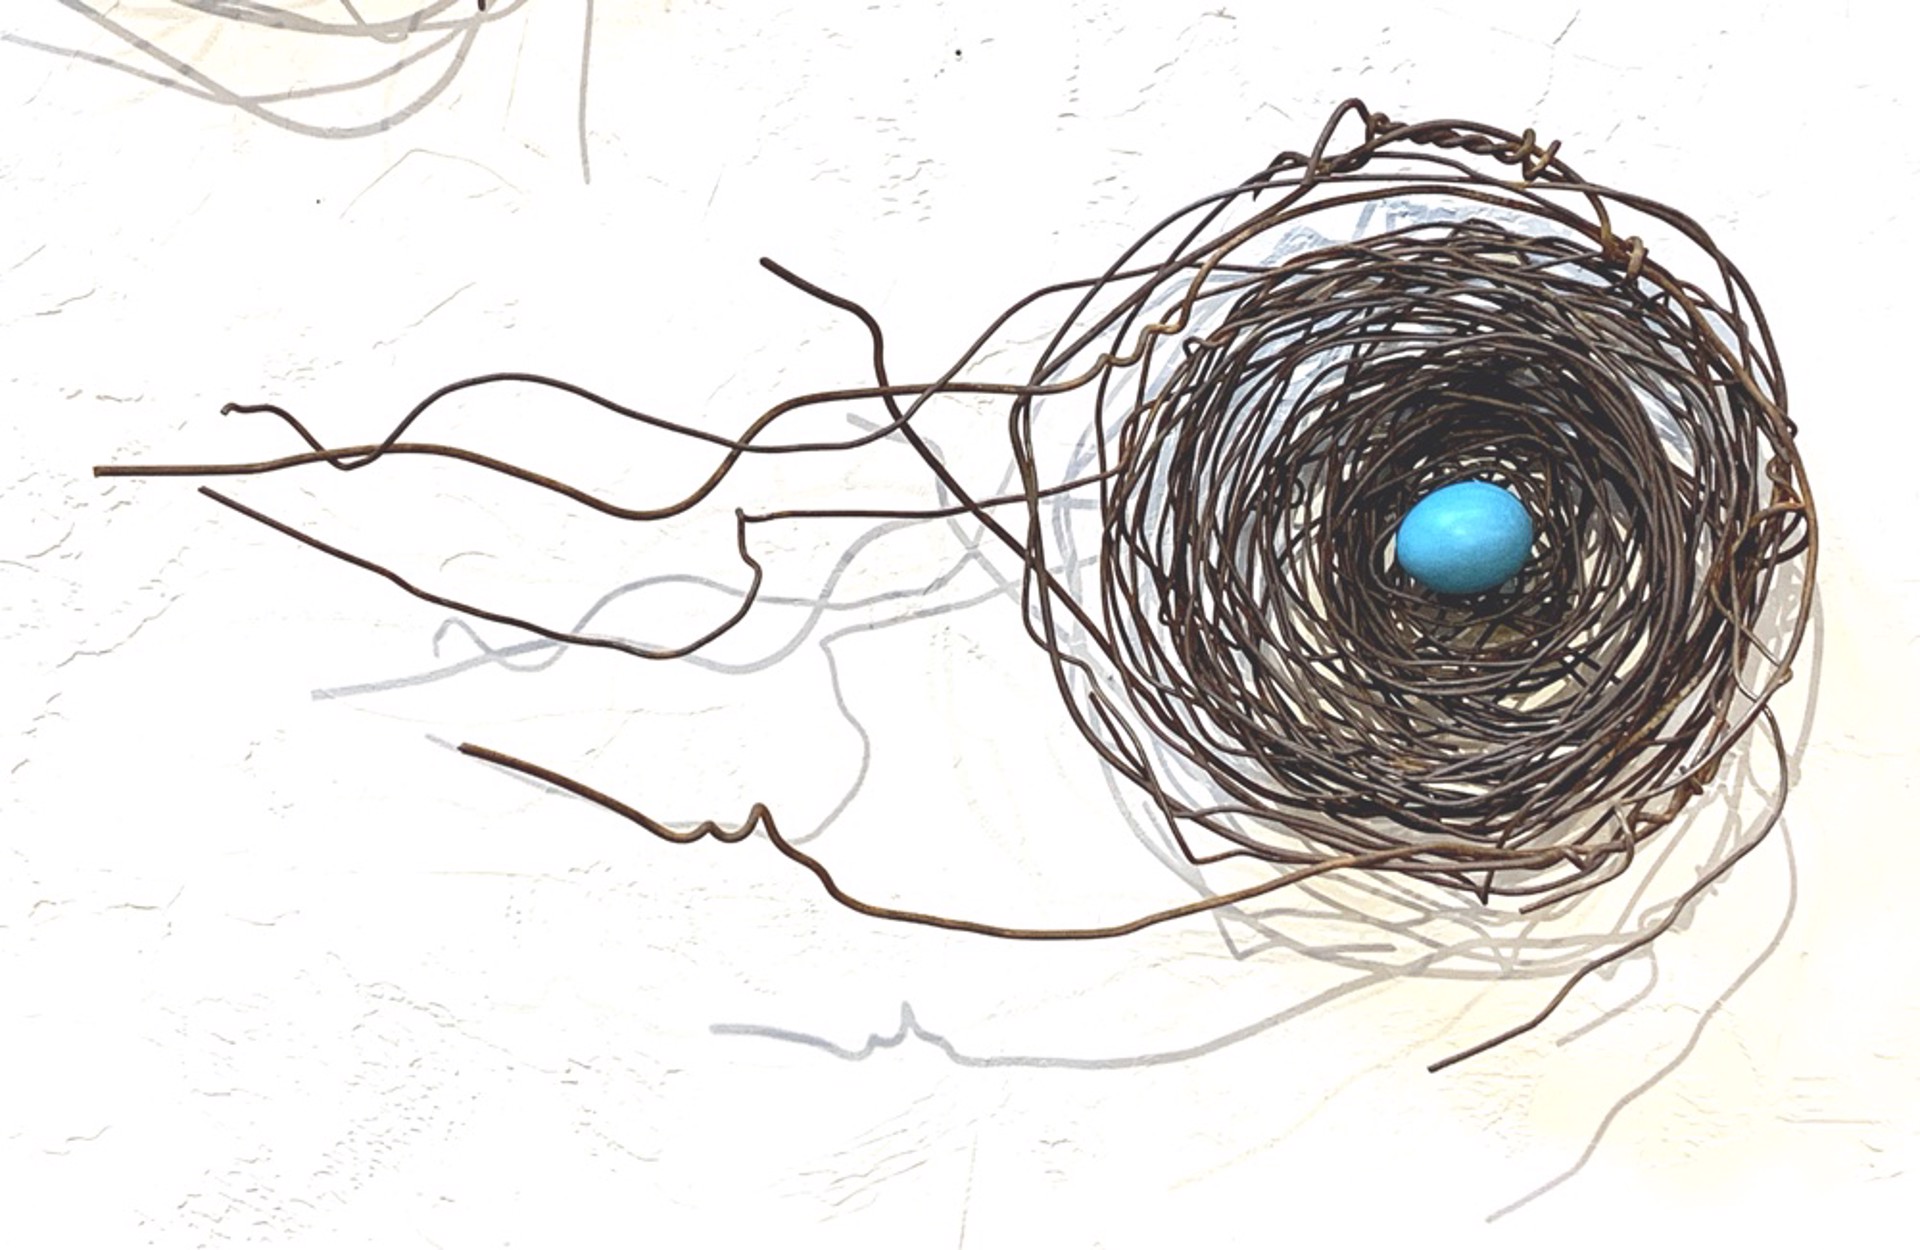 Hand Woven Wire Nest With 1 Turquoise Ceramic Eggs - 1334 by Phil Lichtenhan